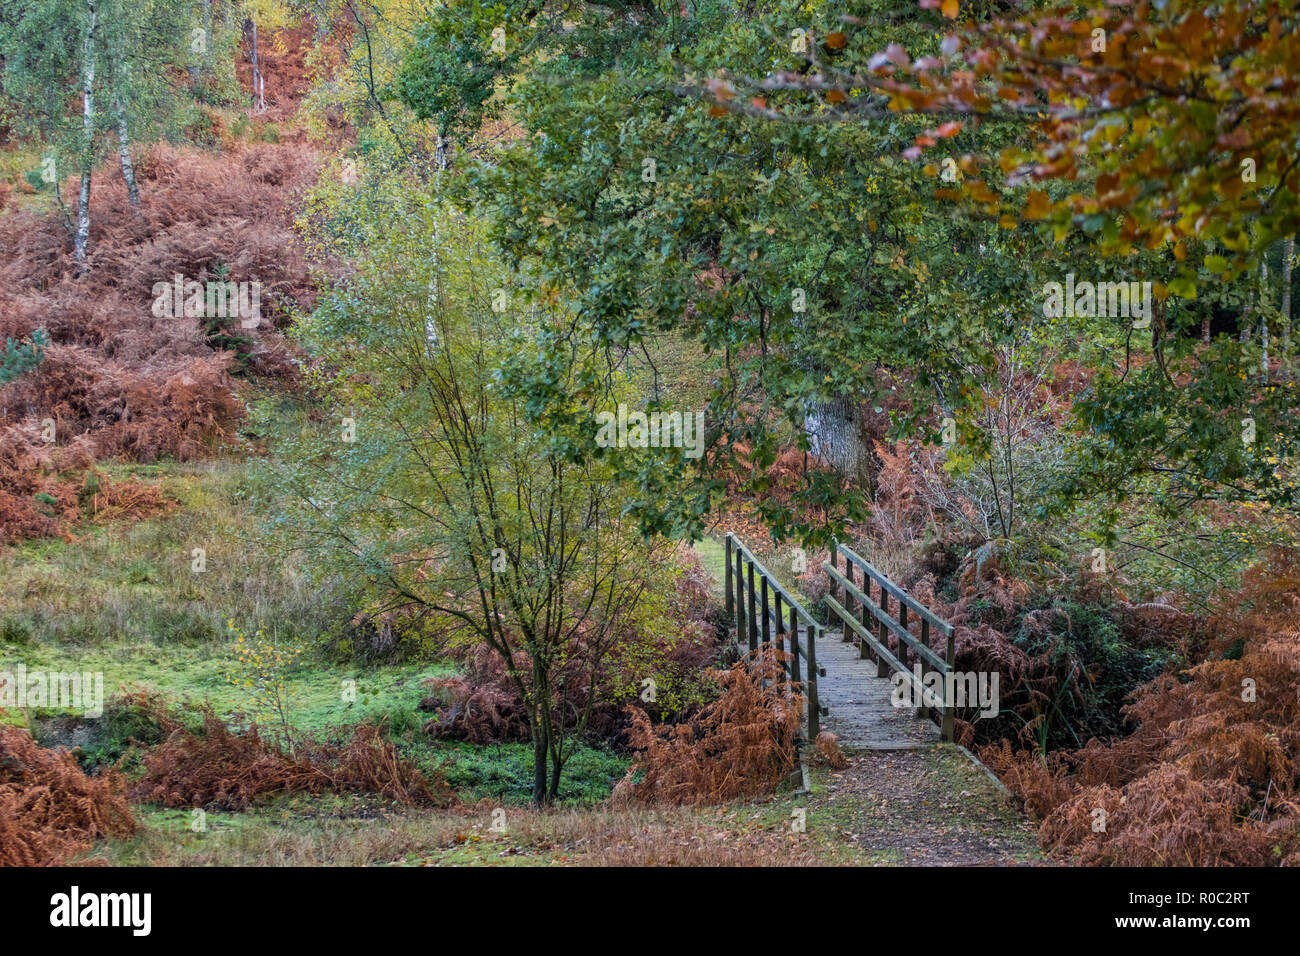 Wooden bridge over small river with trees and autumn colours Stock Photo